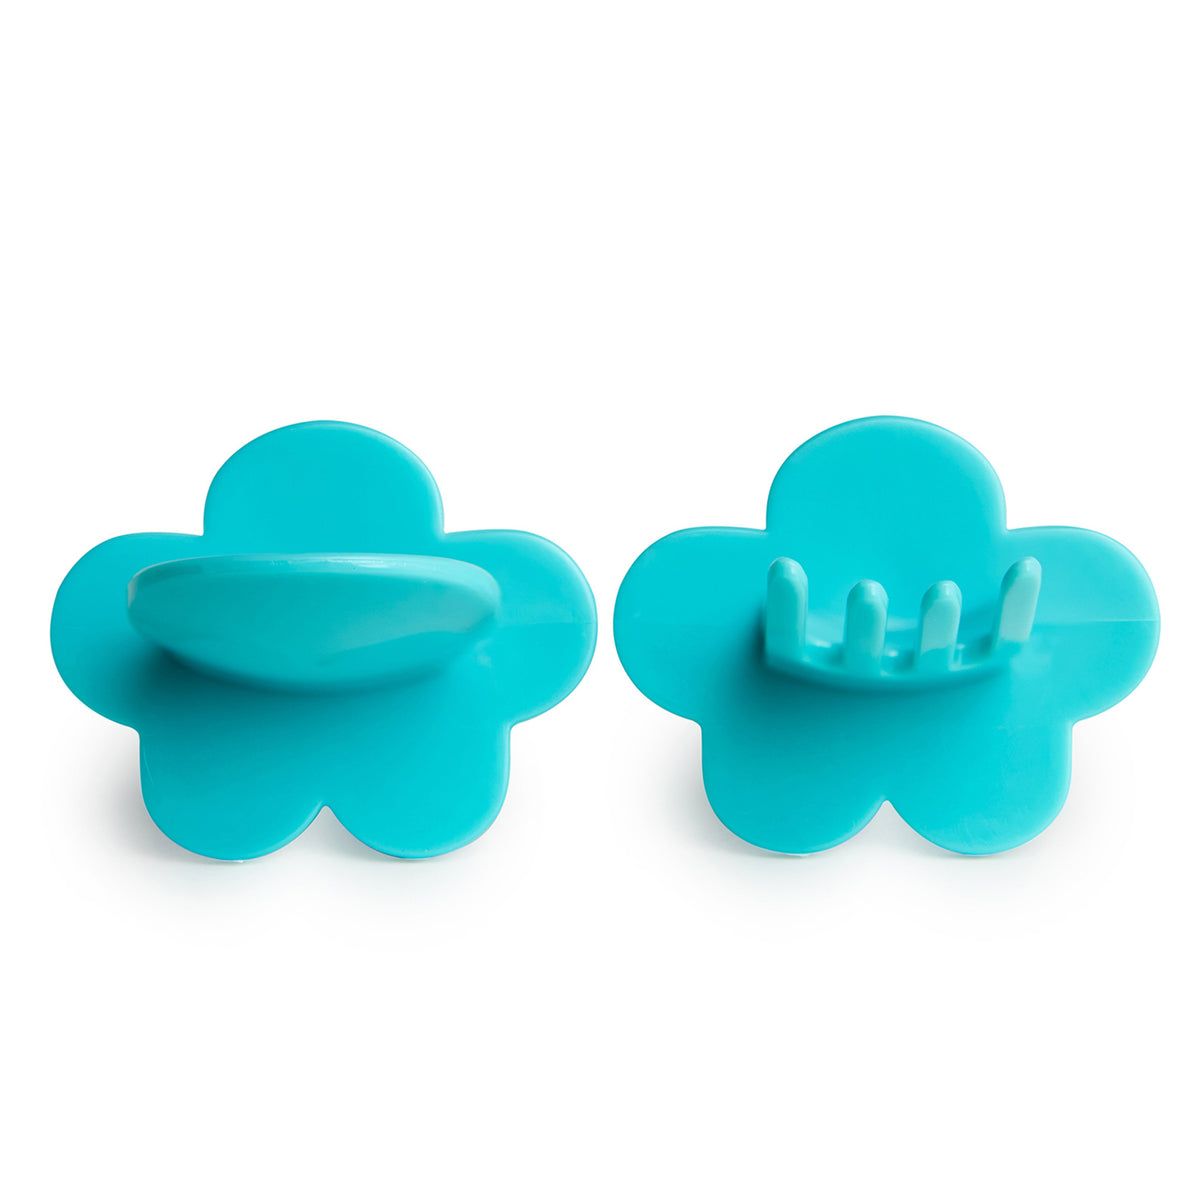 grabease-fork-and-spoon-set-teal- (2)